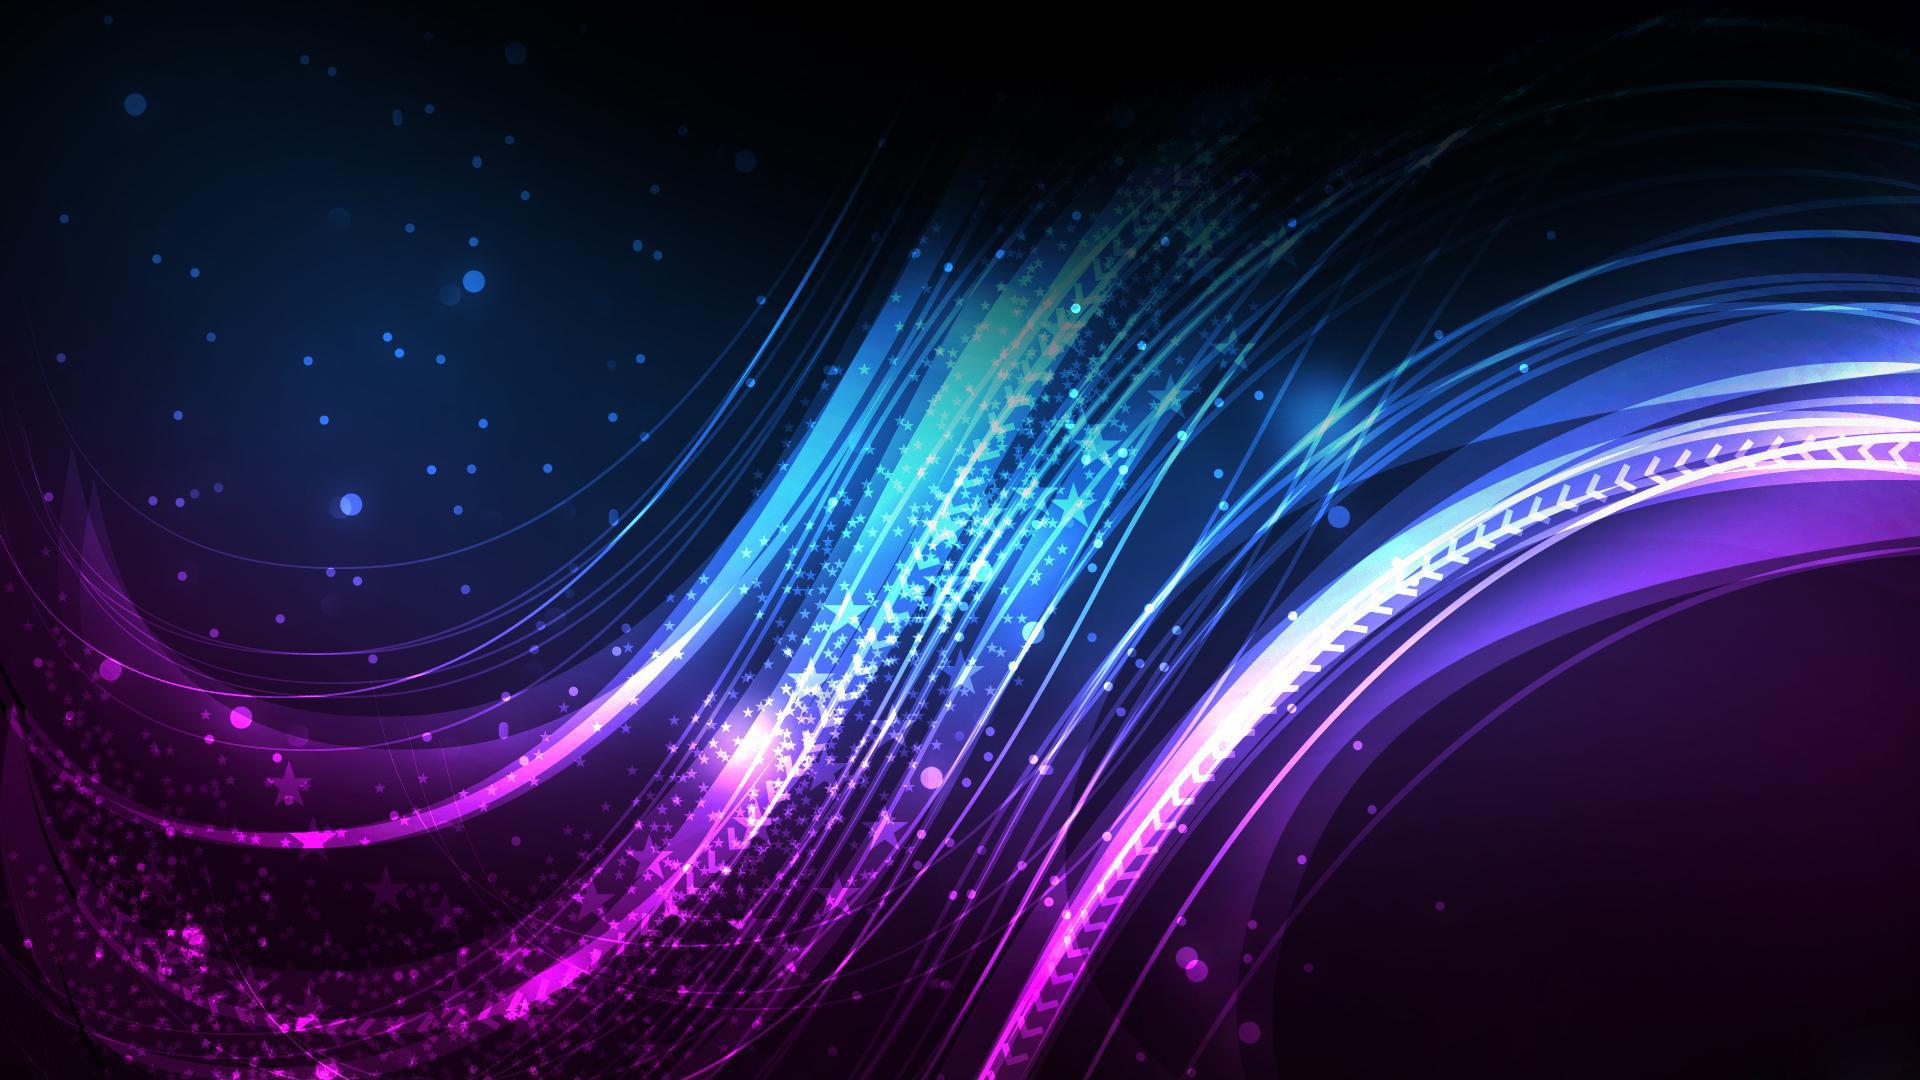 1920x1080 ... Pictures HD 1080p Desktop. Abstract Design 1080p Hd 1080P Abstract  Wallpaper ...